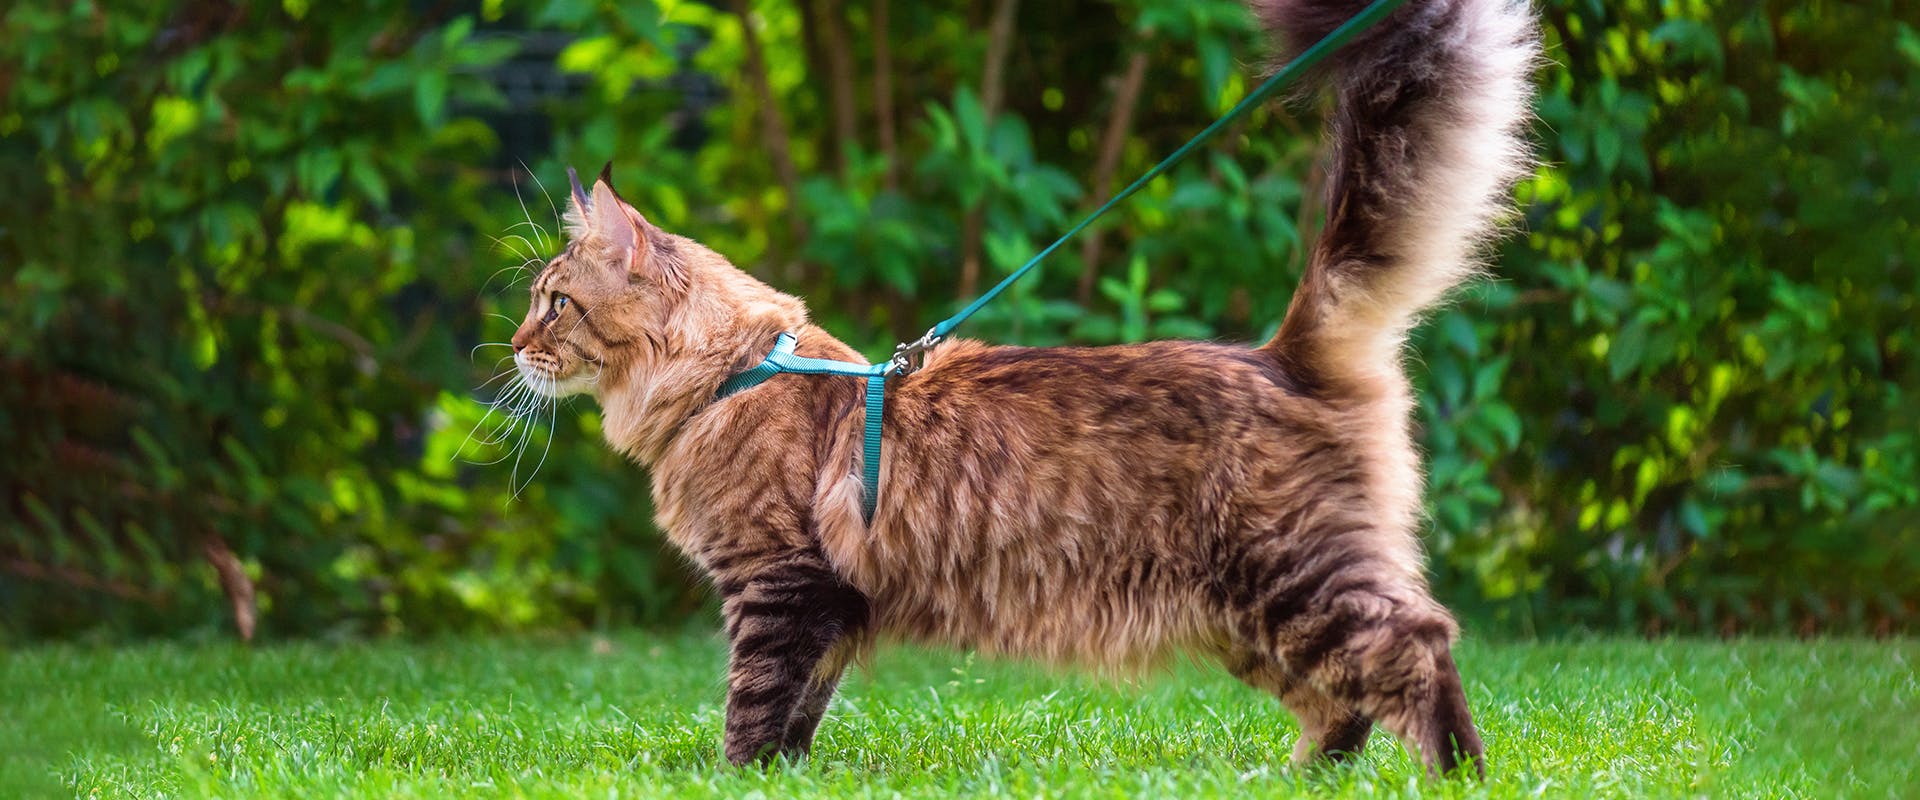 A large fluffy cat standing on some grass, wearing a bright green cat harness